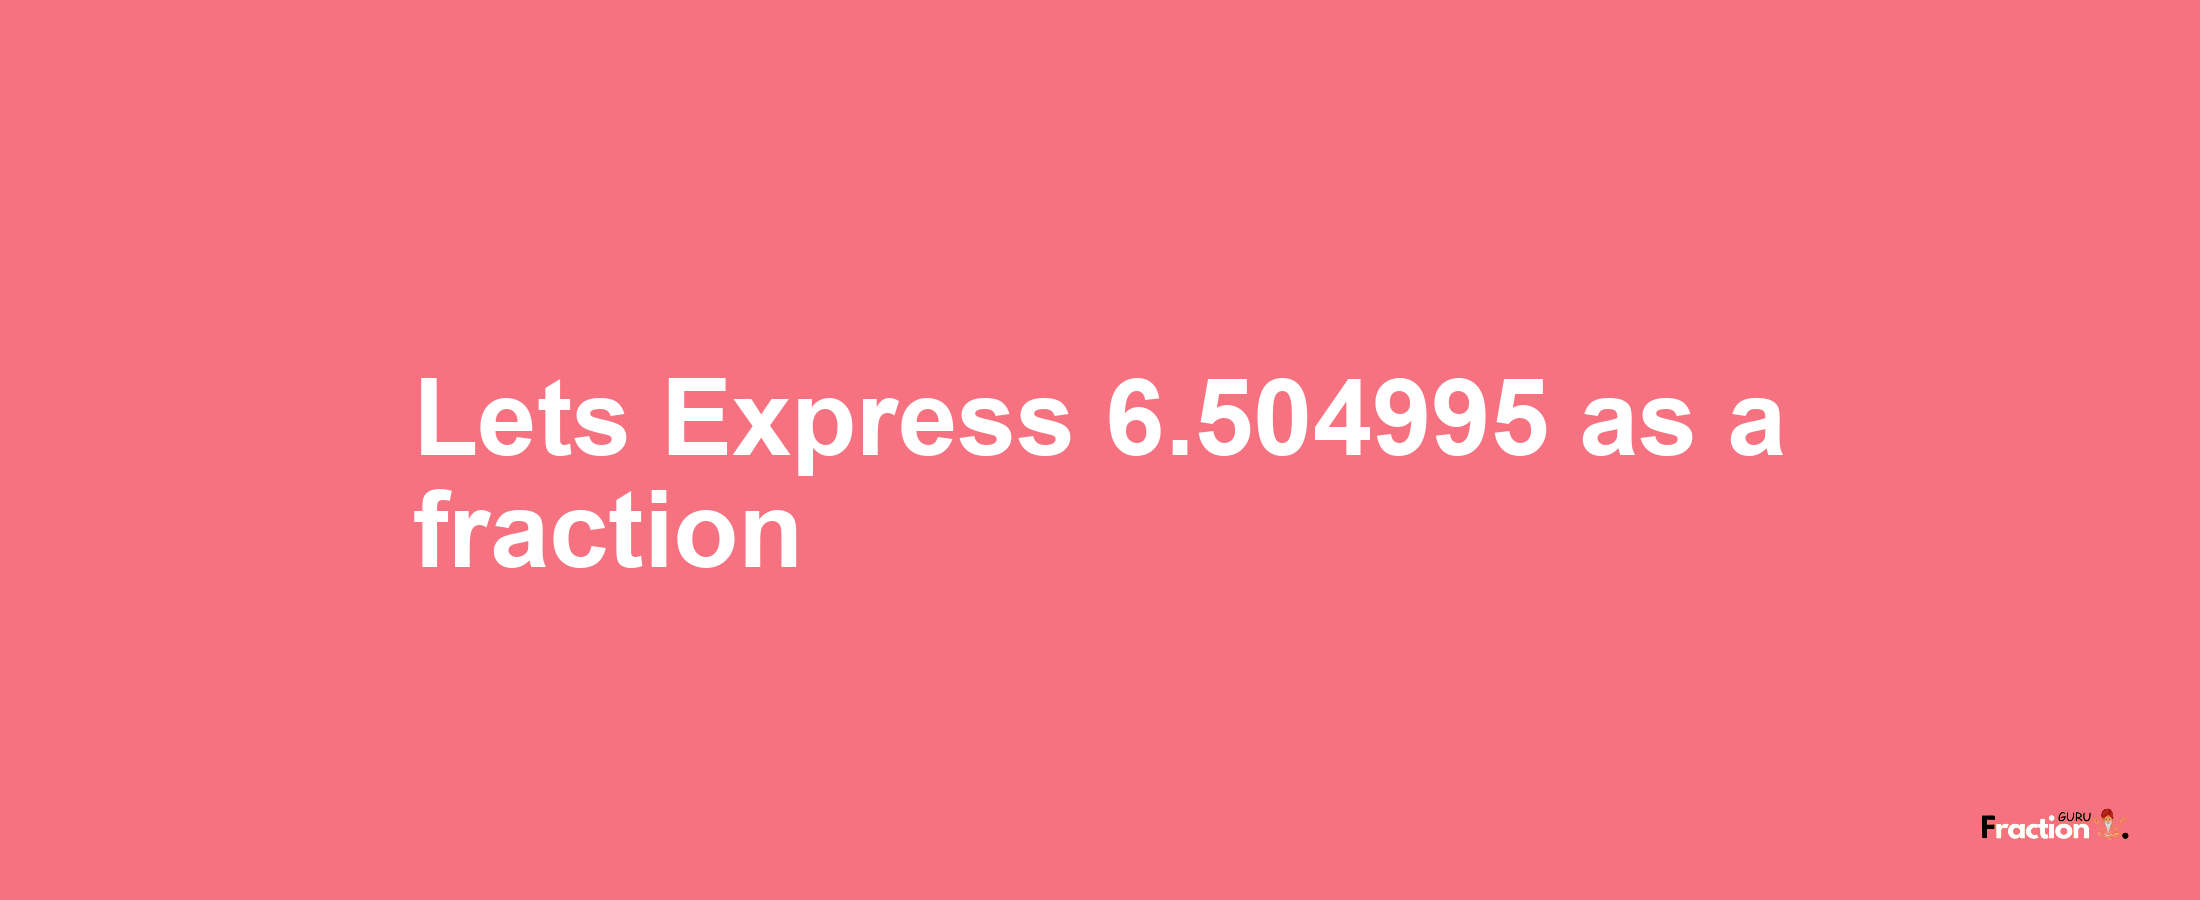 Lets Express 6.504995 as afraction